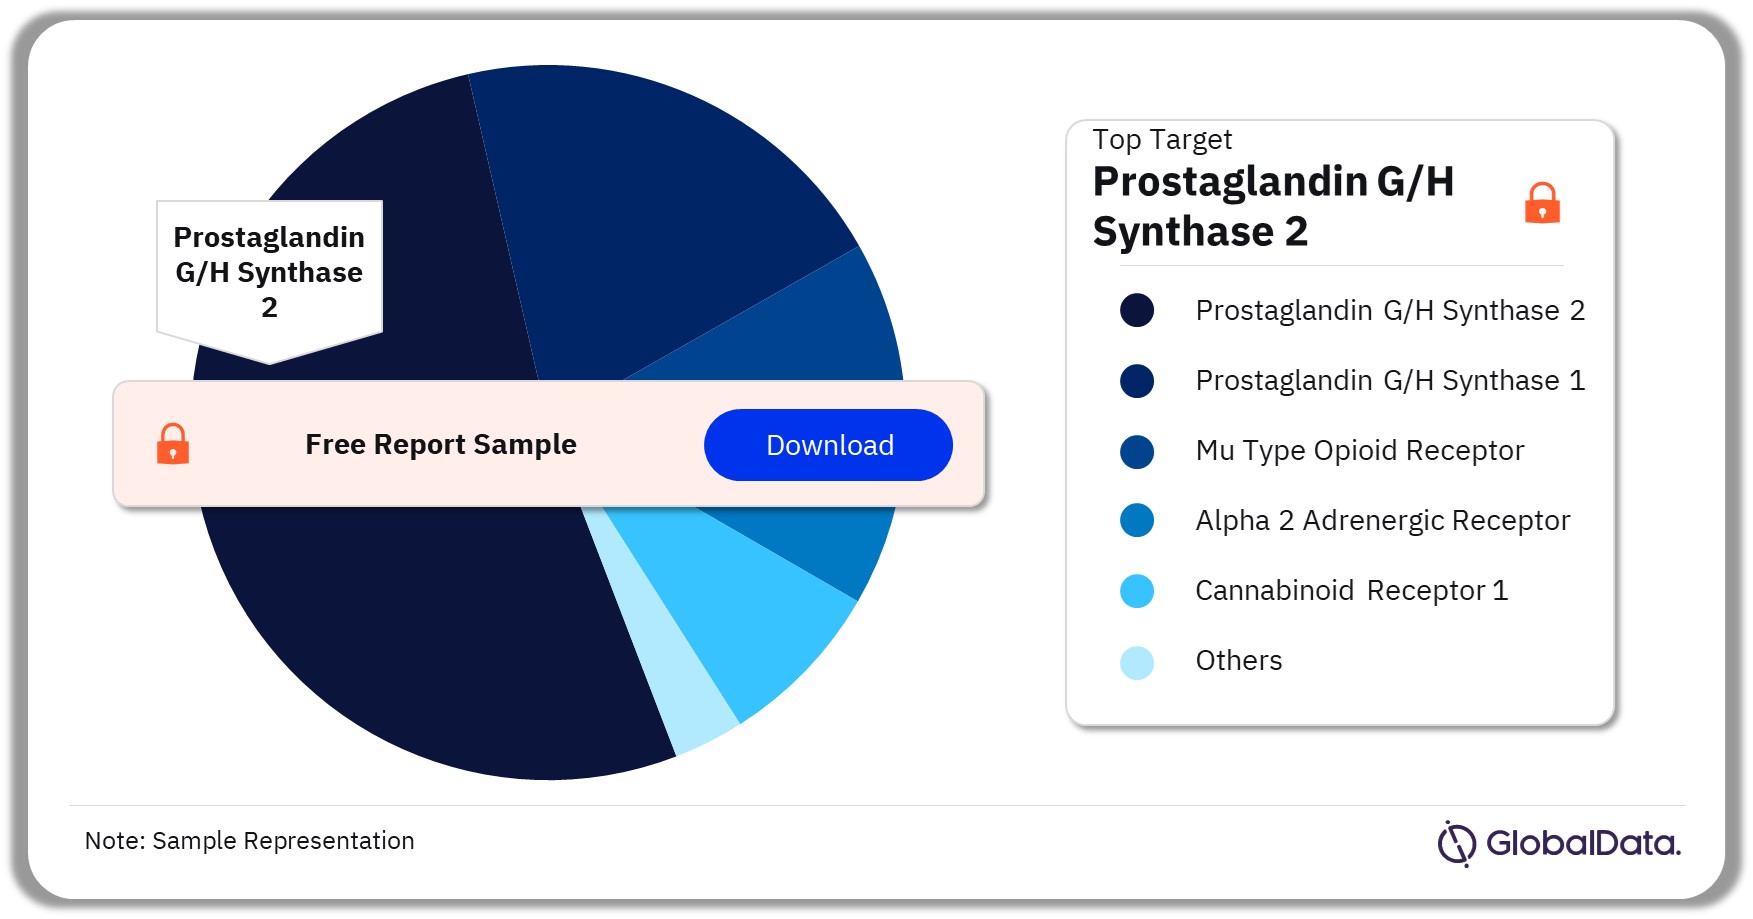 Low Back Pain Pipeline Drugs Market Analysis, by Target, 2022 (%)